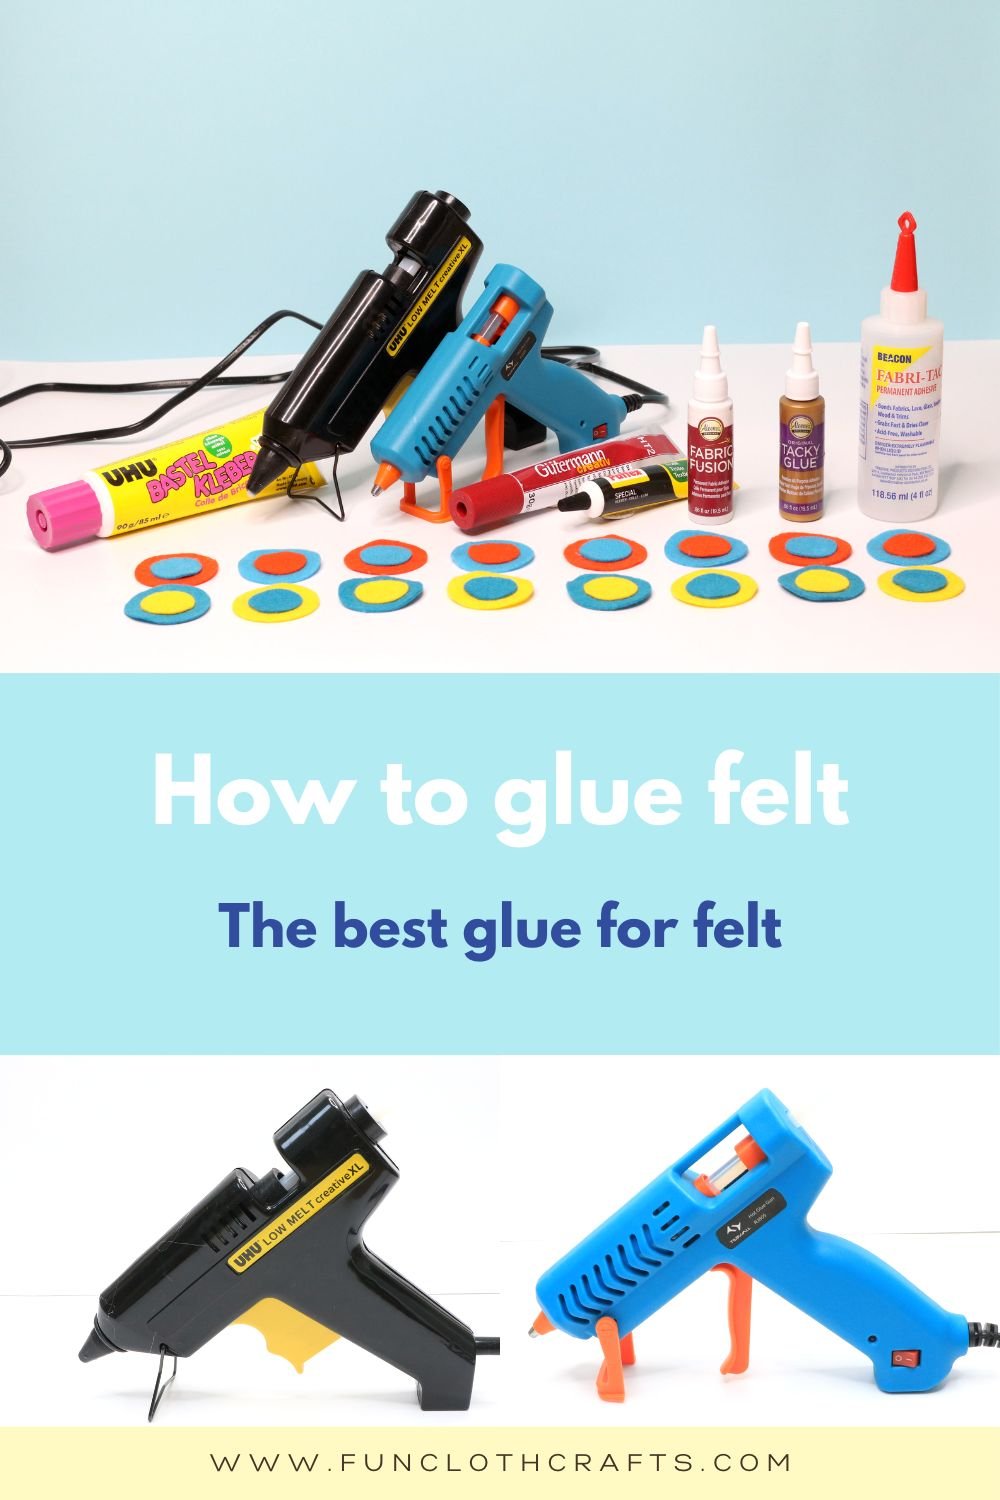 8 Best Types of Glues - Easy Tacky Glue Uses for Your Next DIY Project